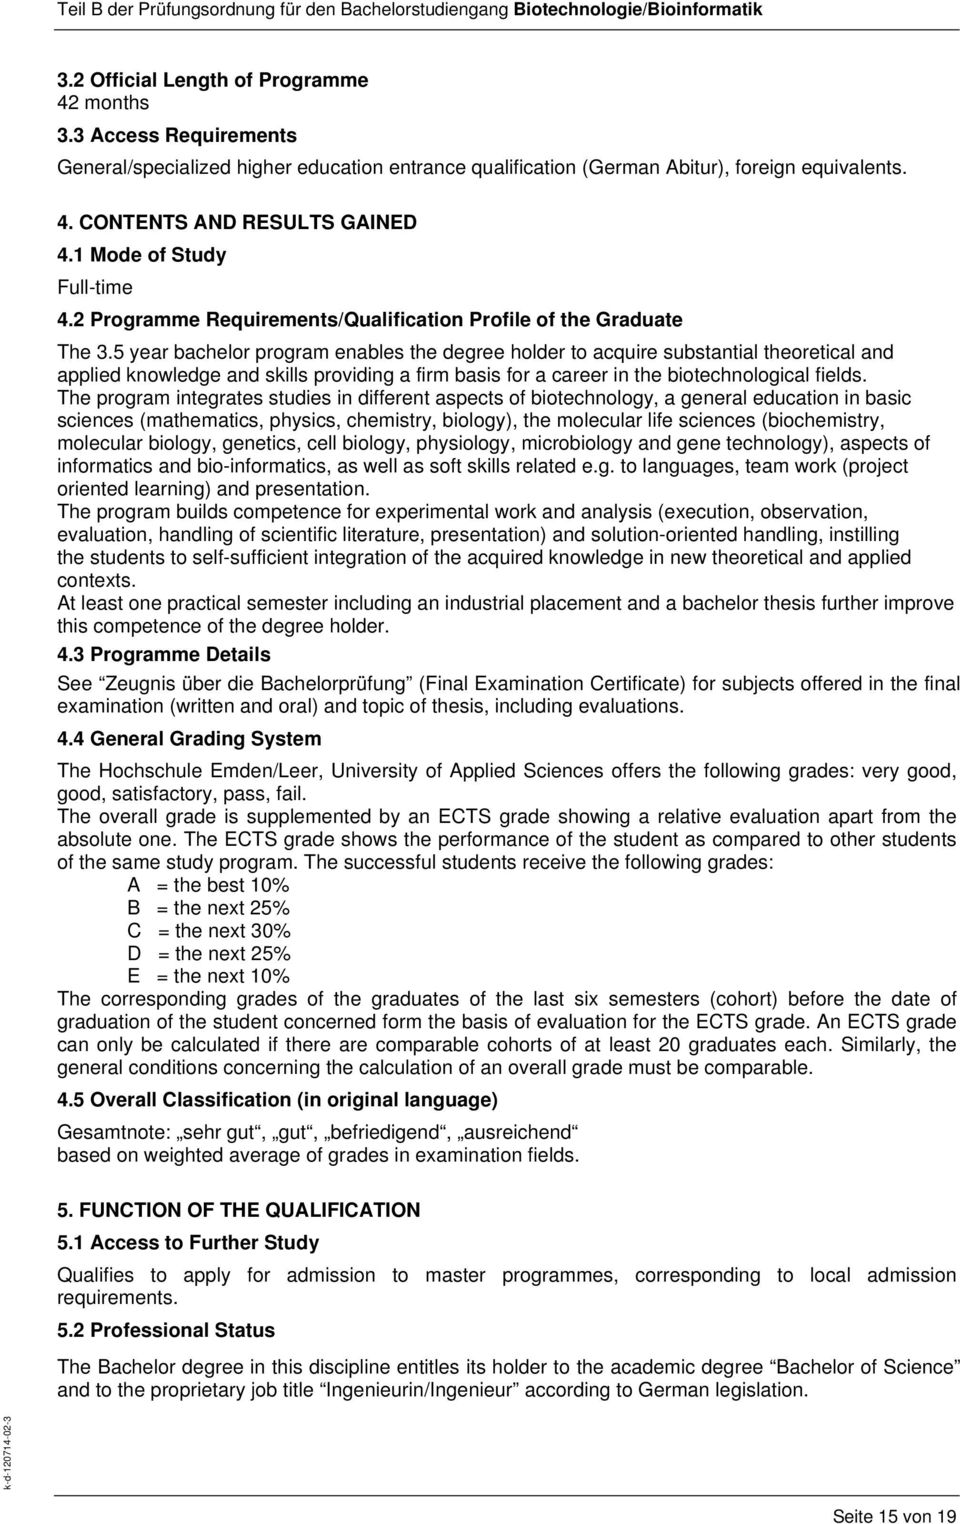 2 Programme Requirements/Qualification Profile of the Graduate The 3.